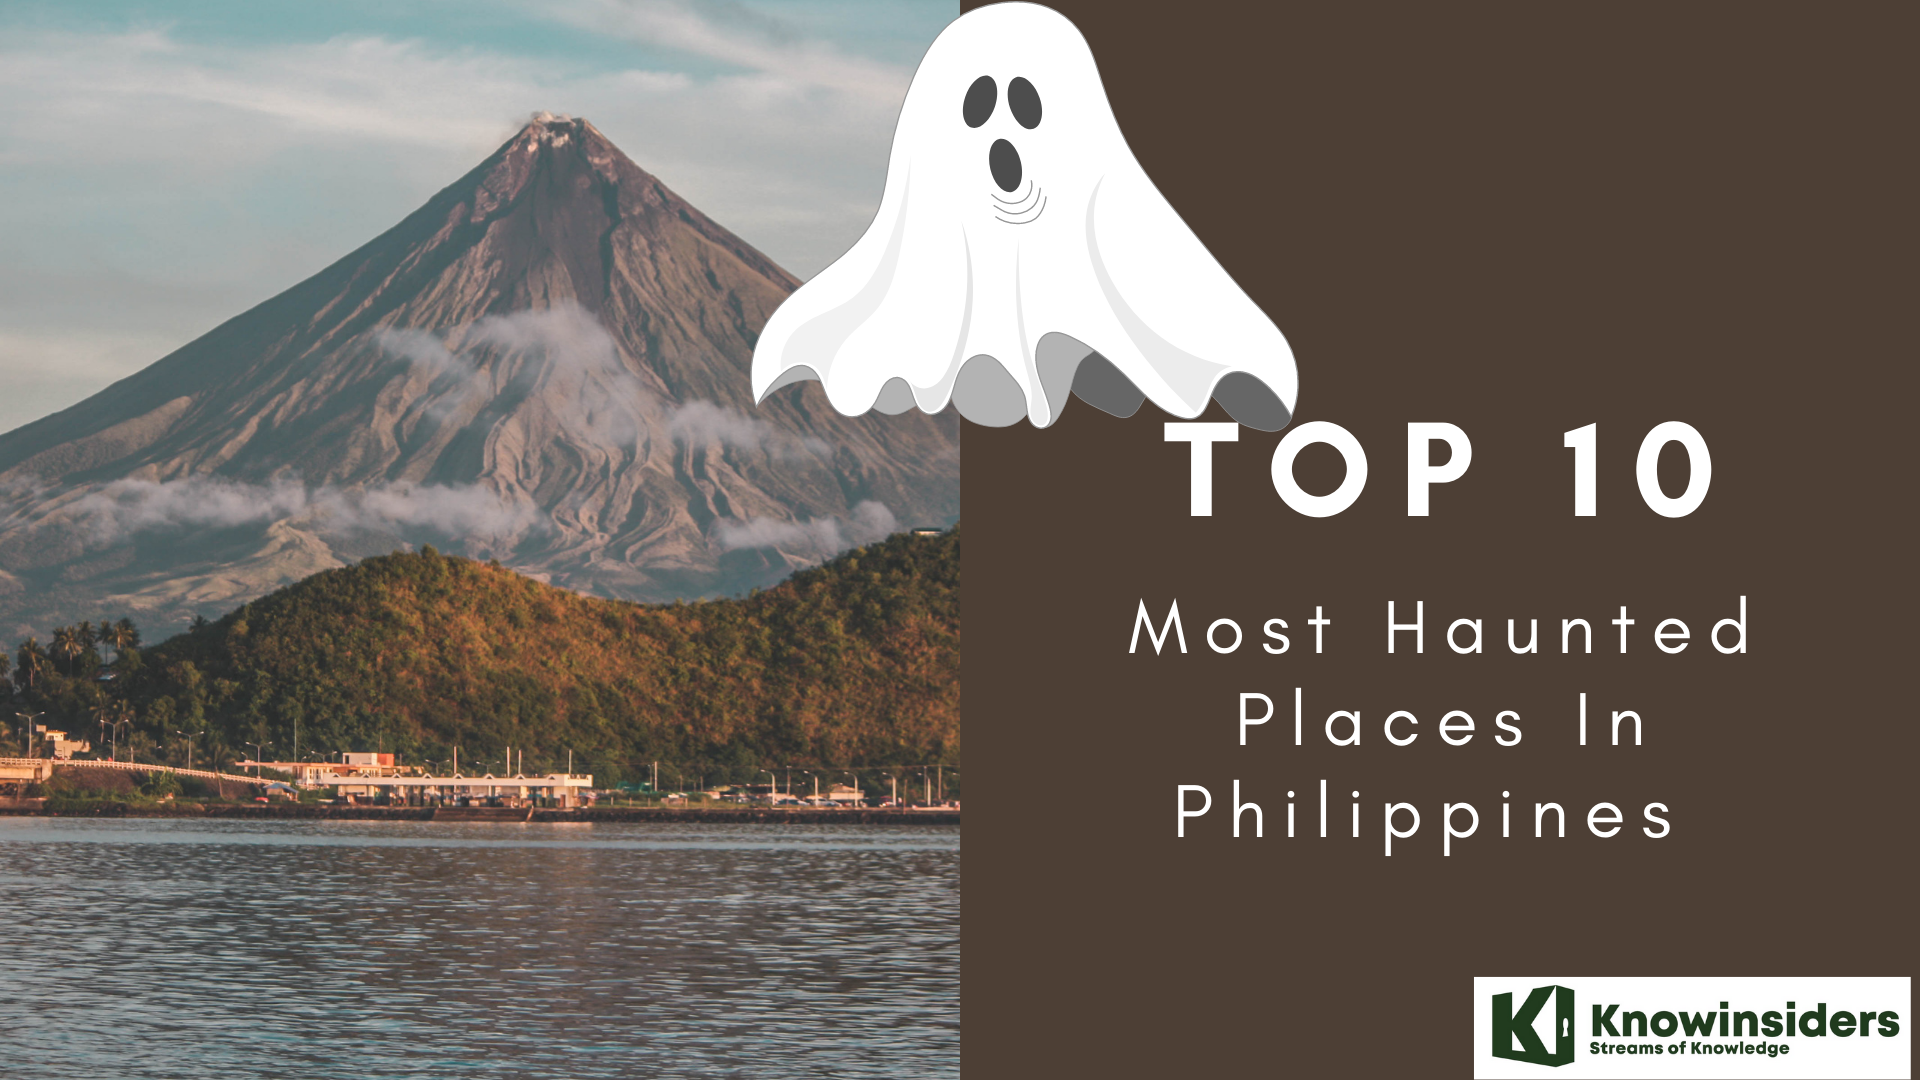 Top 10 Most Haunted Places in Philippines